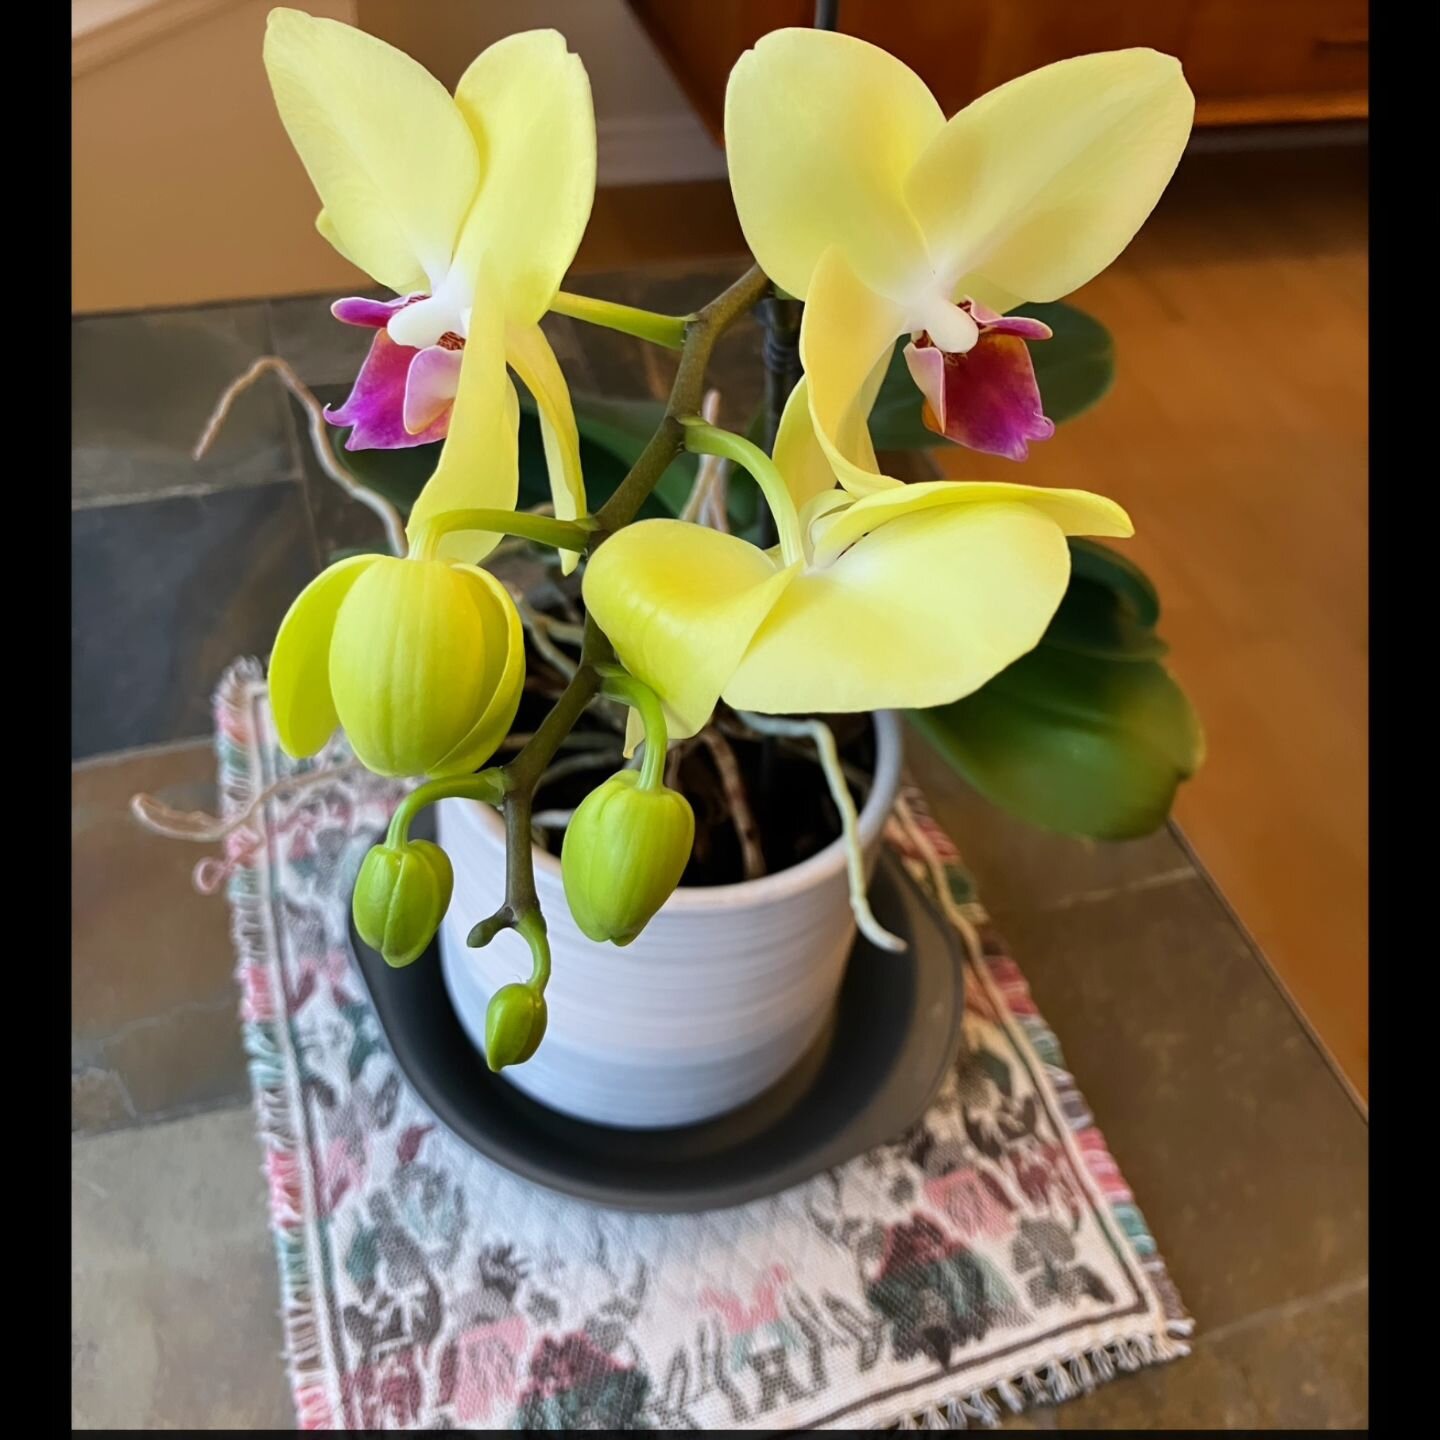 I got this Phalenopsis orchid for my mother in law four years ago, and for the first few years, it didn't show much sign of life after the initial blooms fell. But after I moved away from Canada, it started flowering bit by bit. Today, 2 years after 